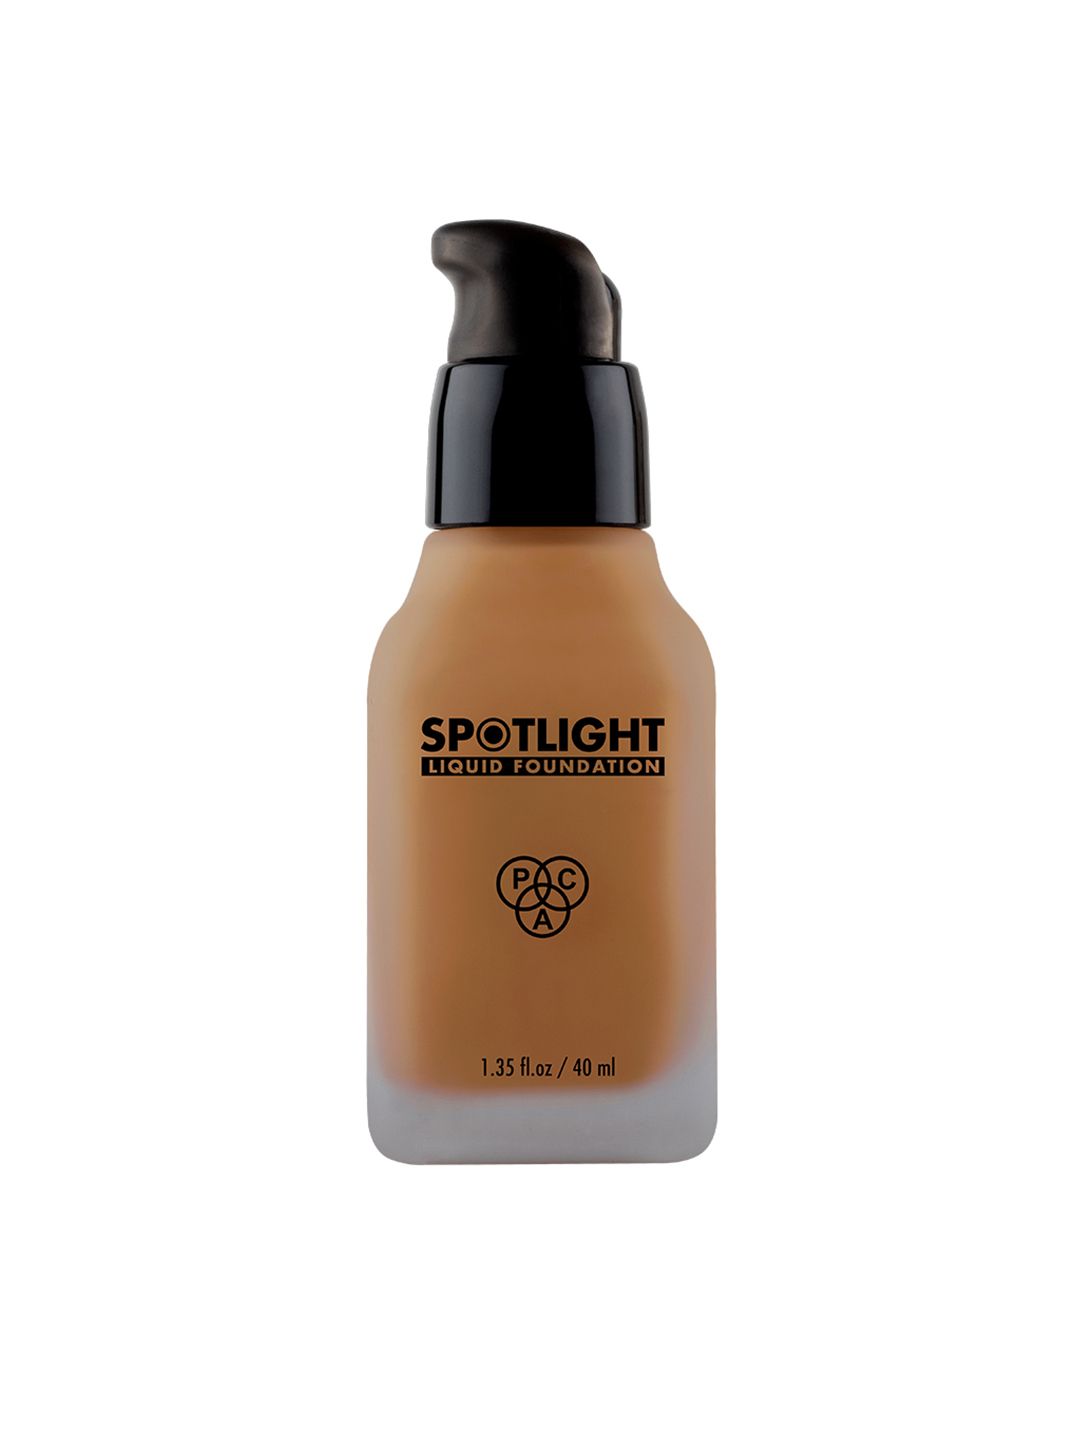 PAC Spotlight Waterproof Liquid Foundation with Hyaluronic Acid 40ml - Cocoa Crunch 17 Price in India